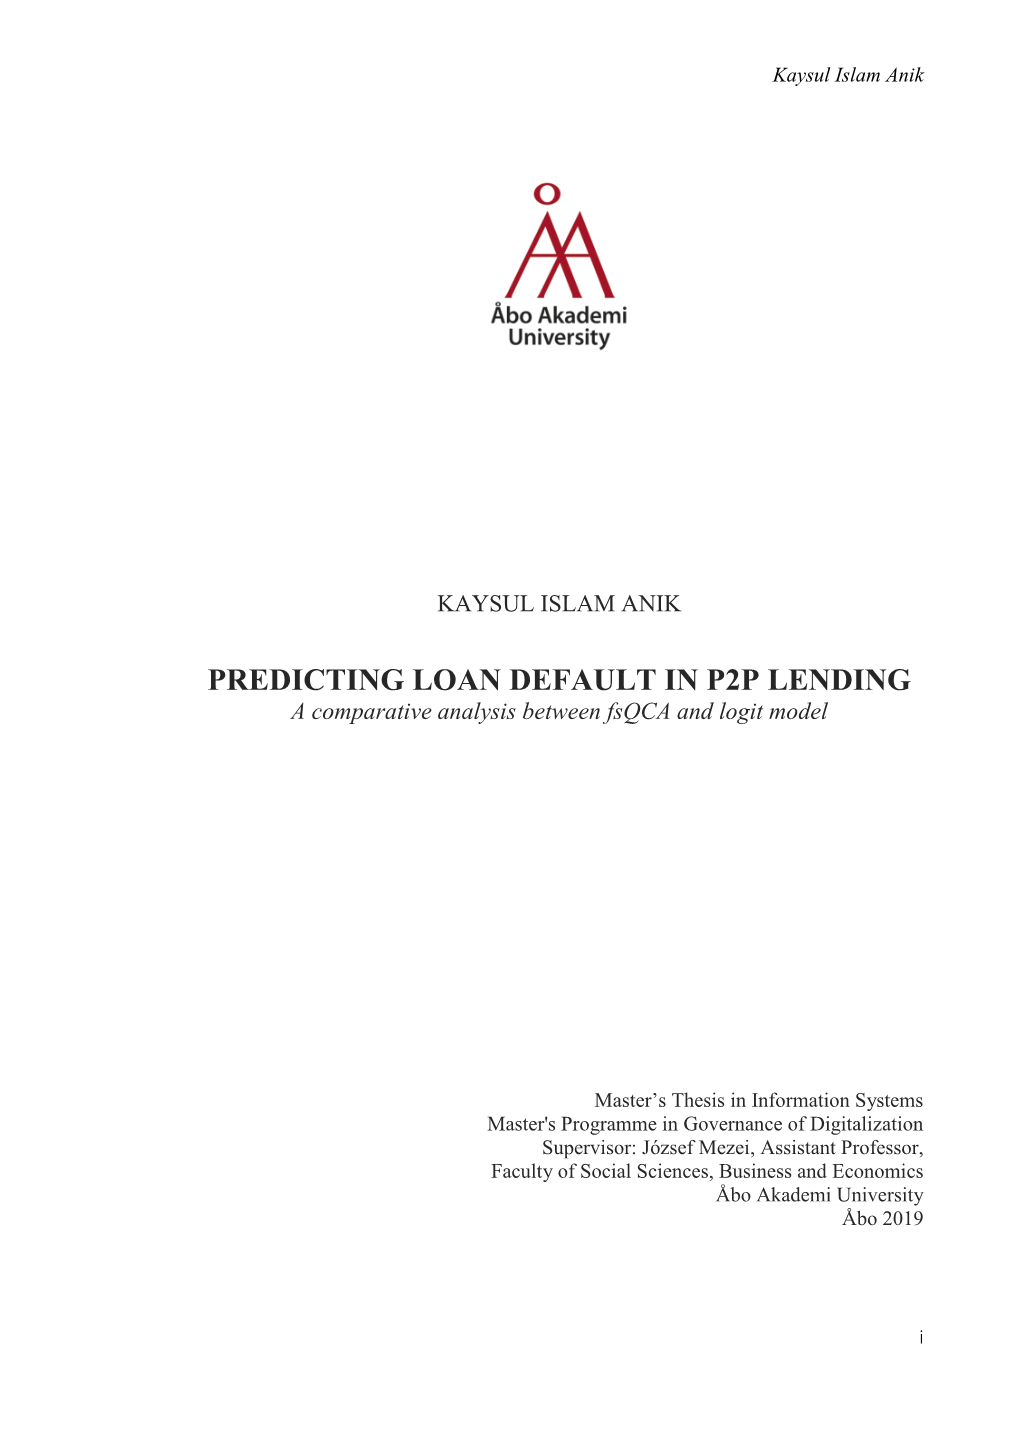 PREDICTING LOAN DEFAULT in P2P LENDING a Comparative Analysis Between Fsqca and Logit Model